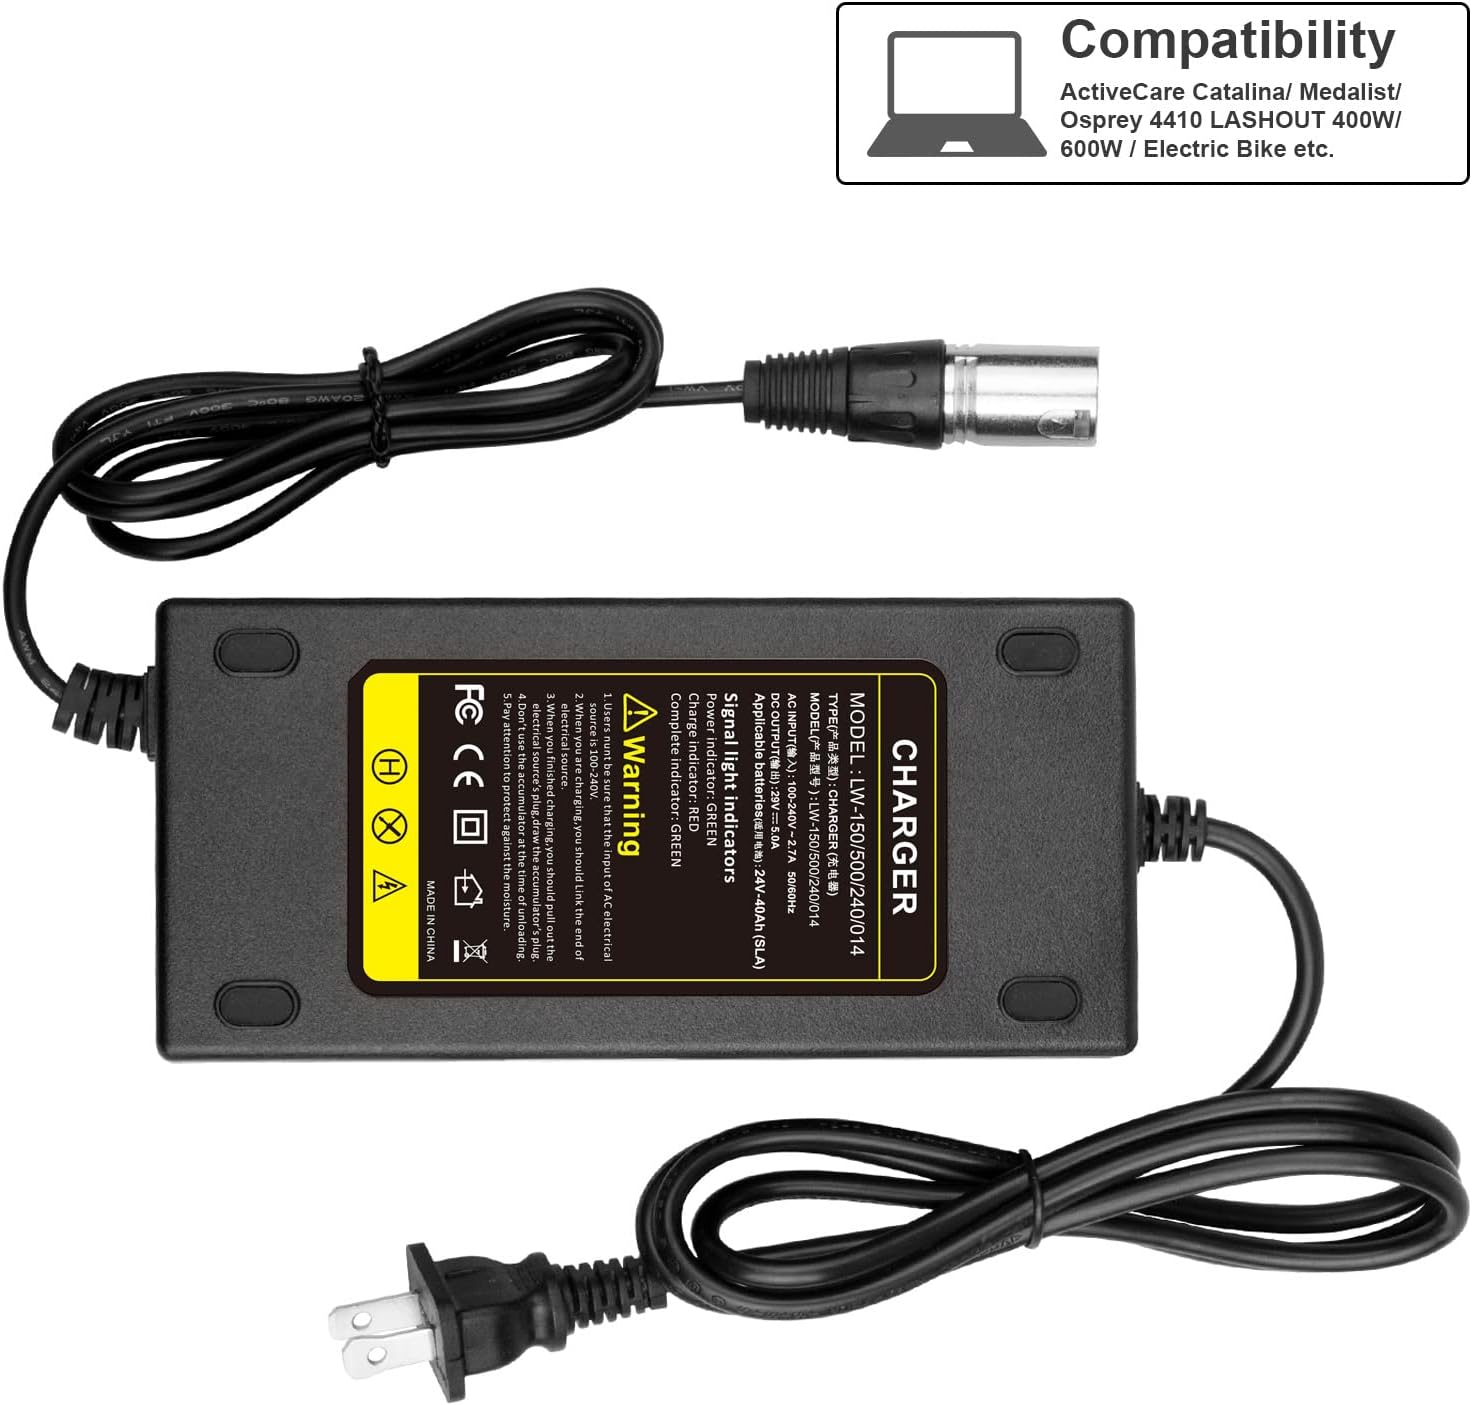 New 24V 5A Battery Charger for Electric Bike, Wheelchair, Mobility EA1065, S150 180 X-CEL, Jazzy 1107,1121, 1121 HD, 614